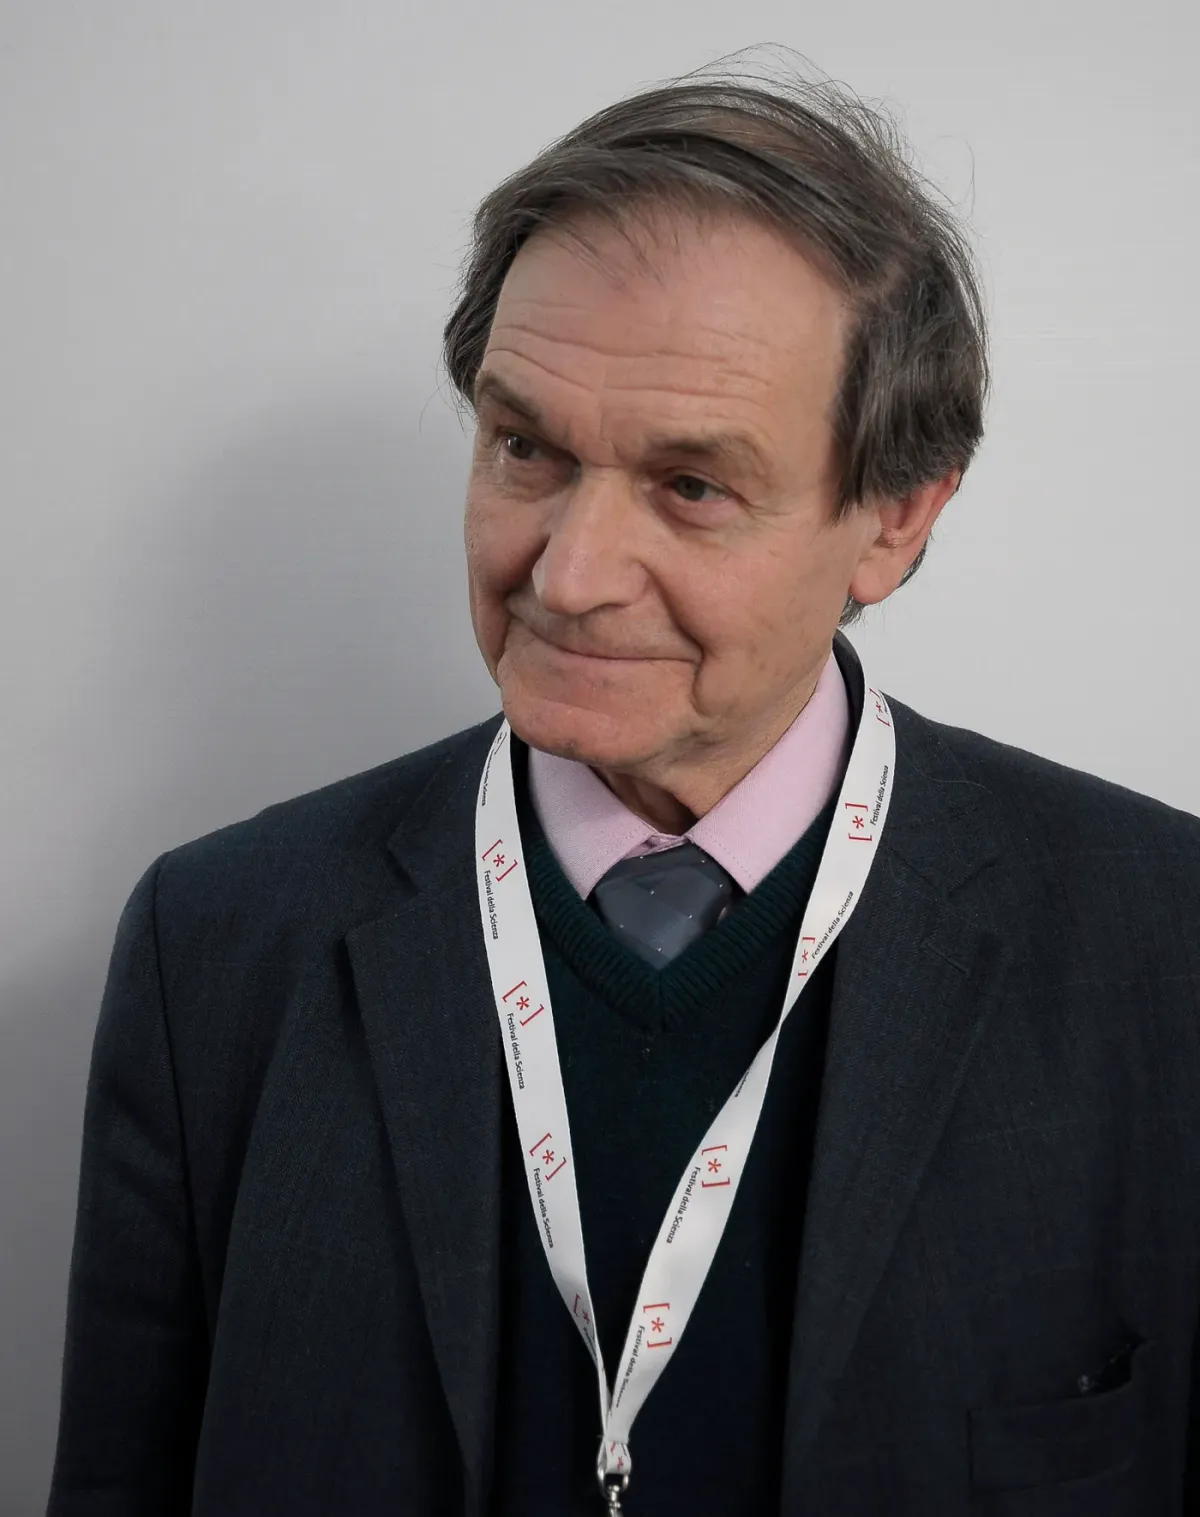 Is Roger Penrose a Platonist or a Pythagorean?